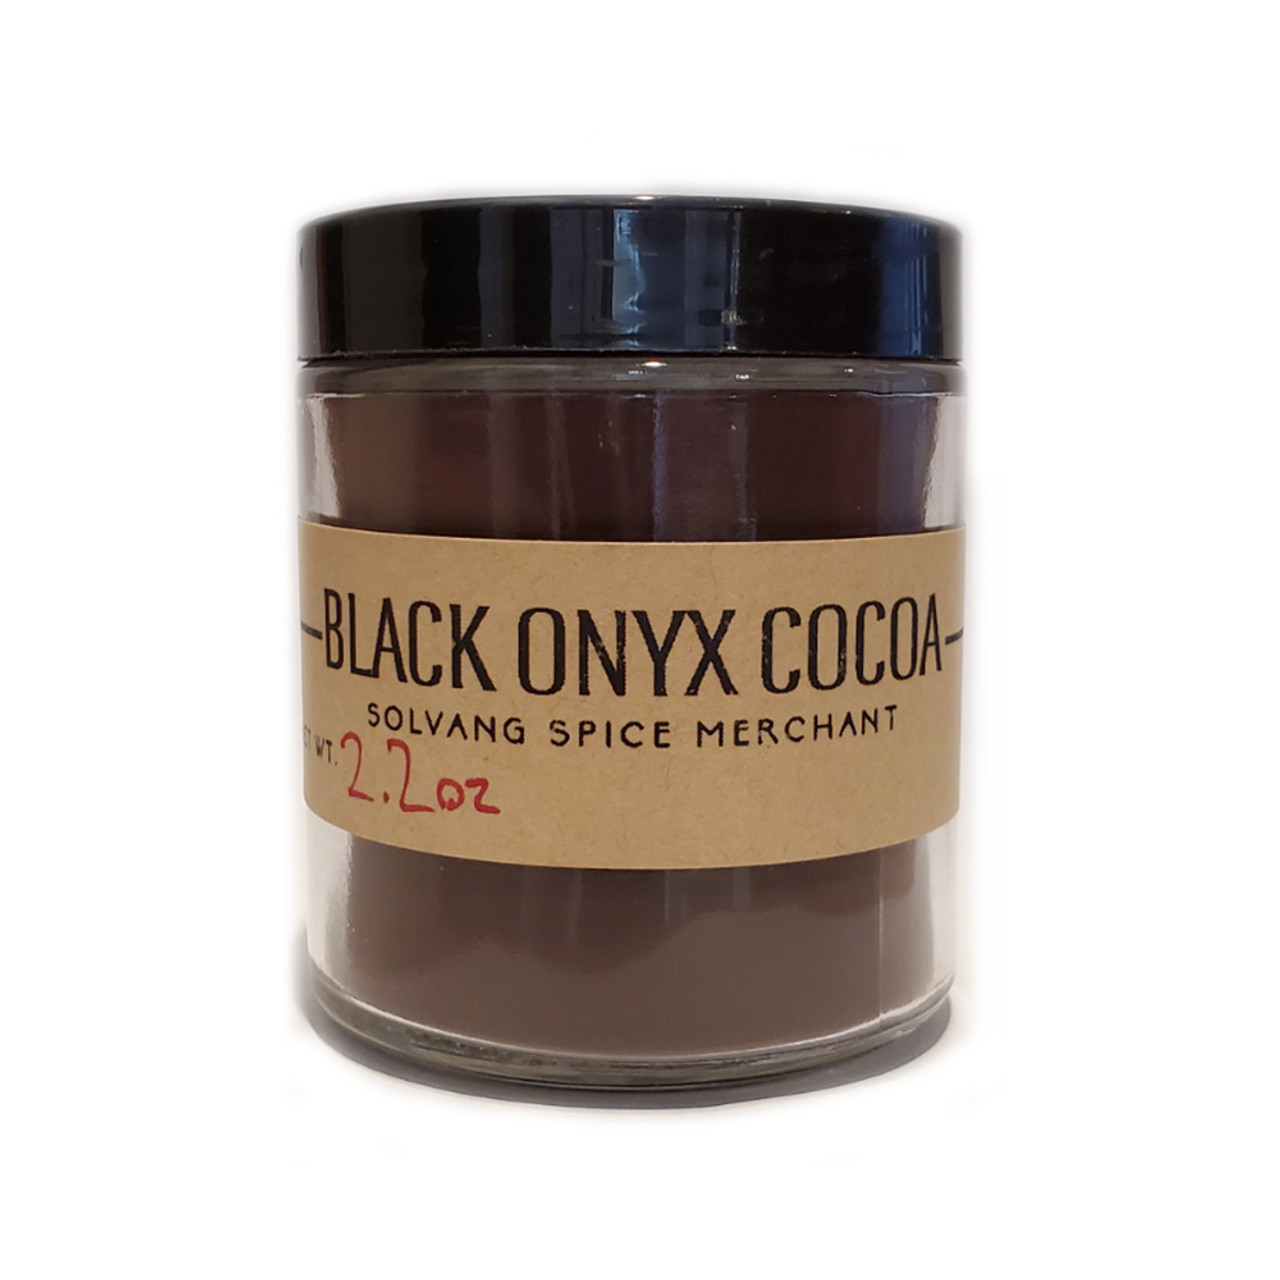 Black Cocoa Powder for Baking- All Natural Alkalized Unsweetened